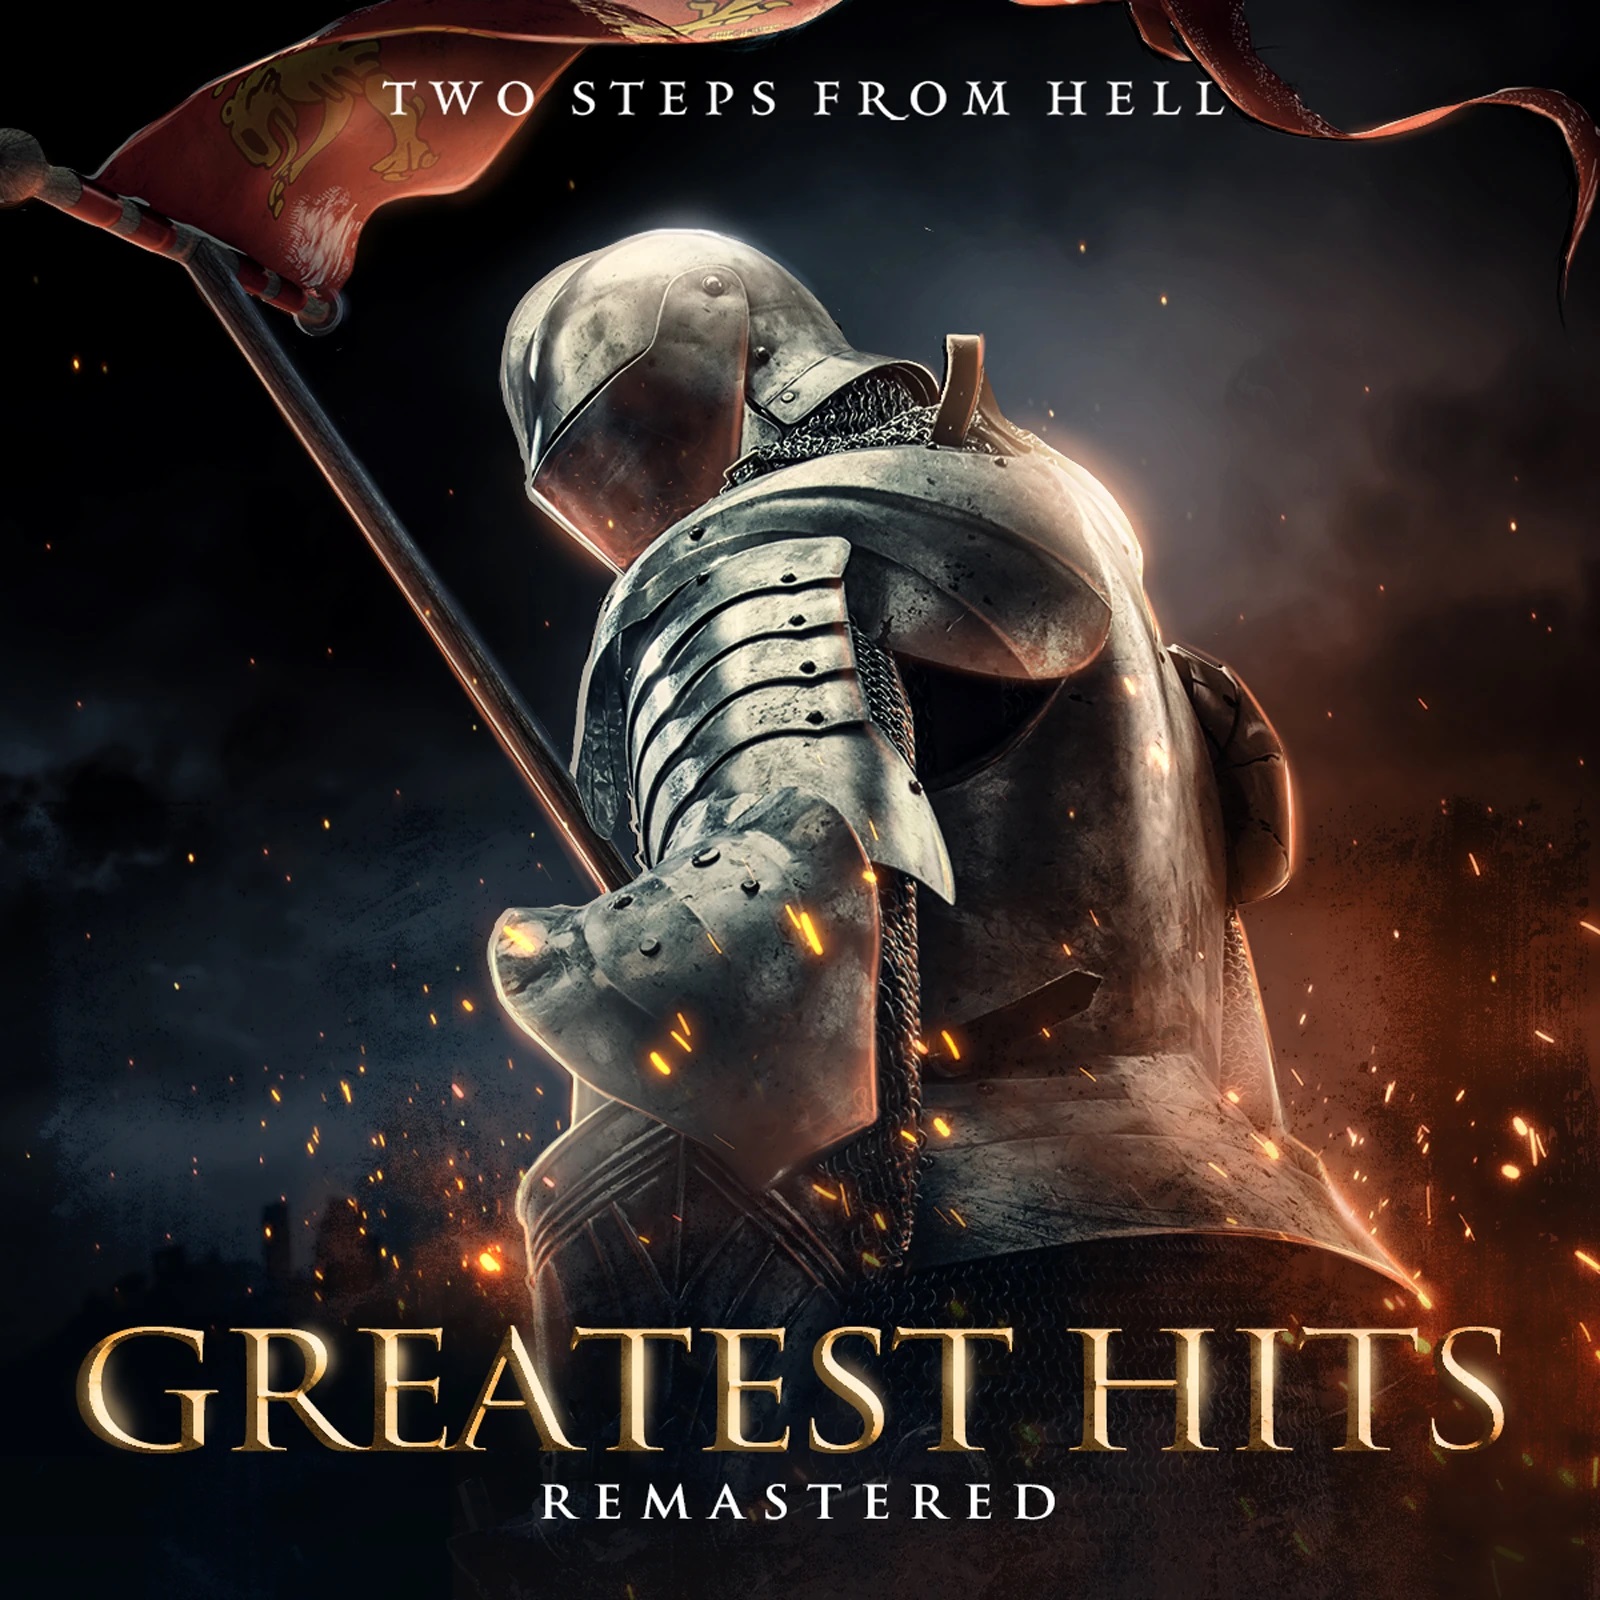 Two Steps From Hell - Greatest Hits: Remastered (2020) [FLAC 24bit/48kHz] Download